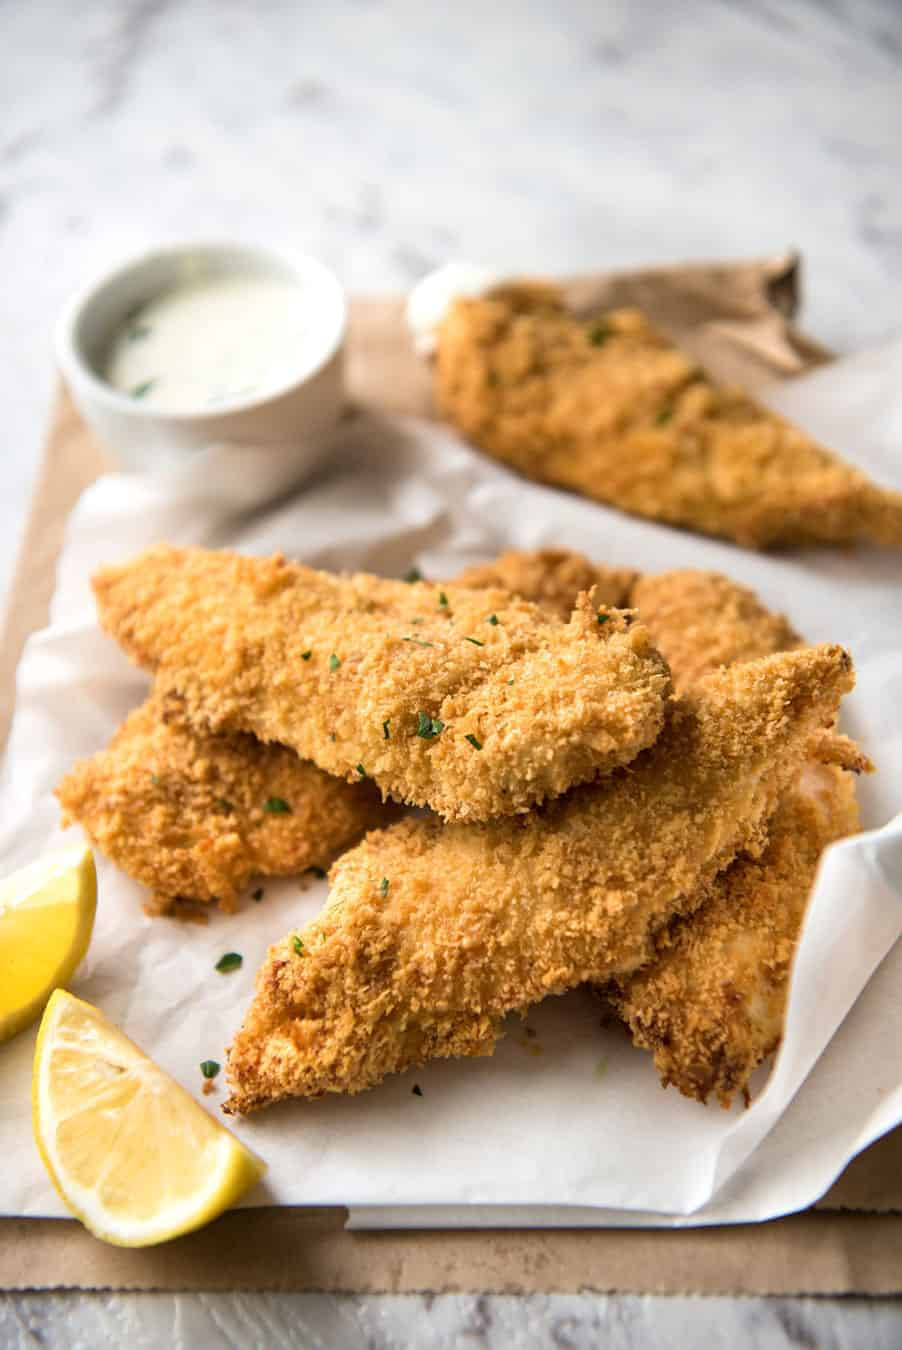 Chicken Tenders In Oven
 Oven Fried Parmesan Baked Chicken Tenders